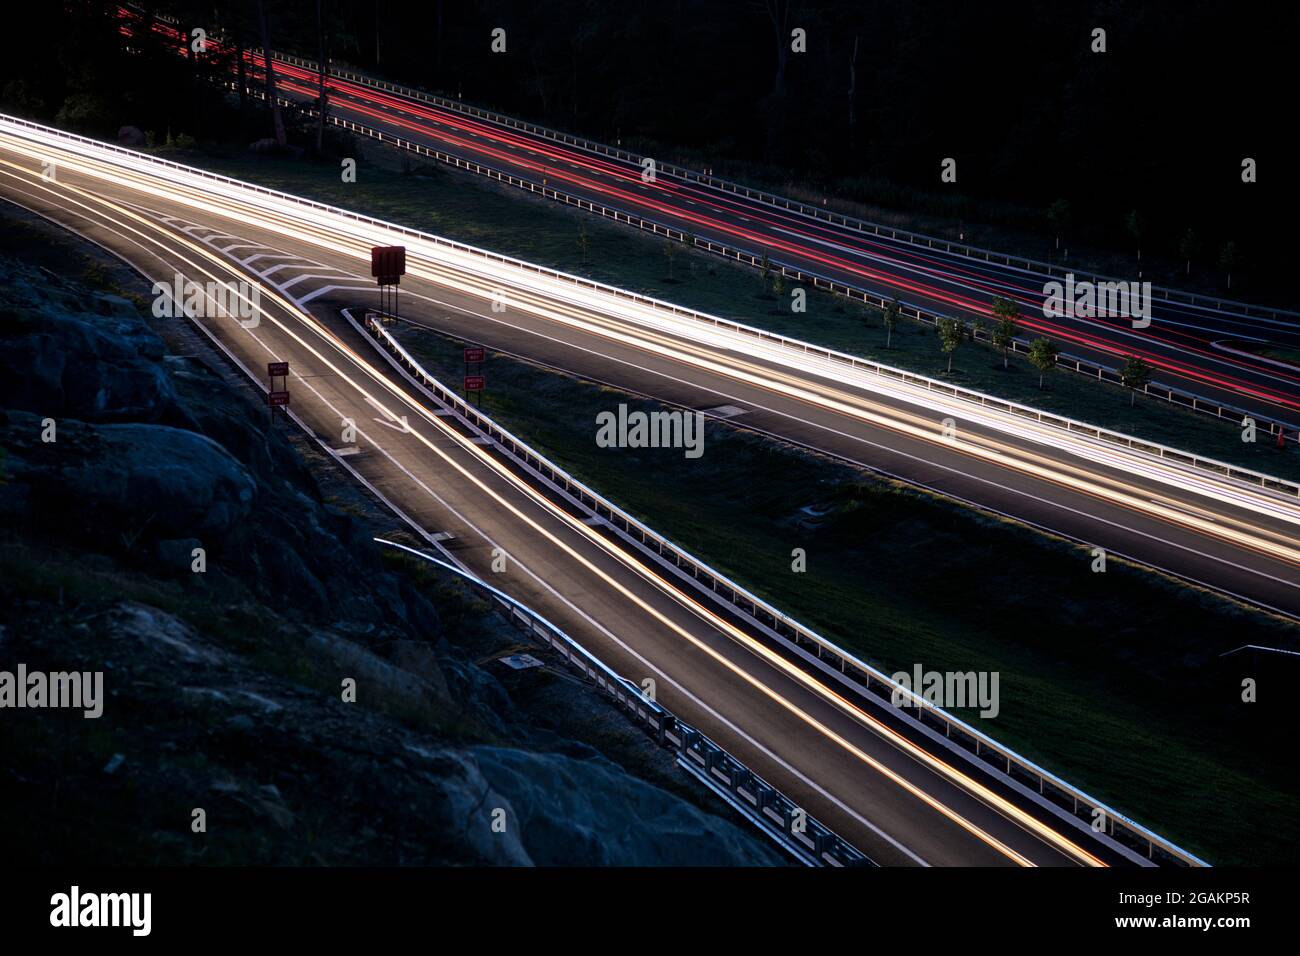 New Pudding Street exit on the Taconic State Parkway at dusk. Rush hour traffic forms light streaks with the slow camera shutter speed. Stock Photo